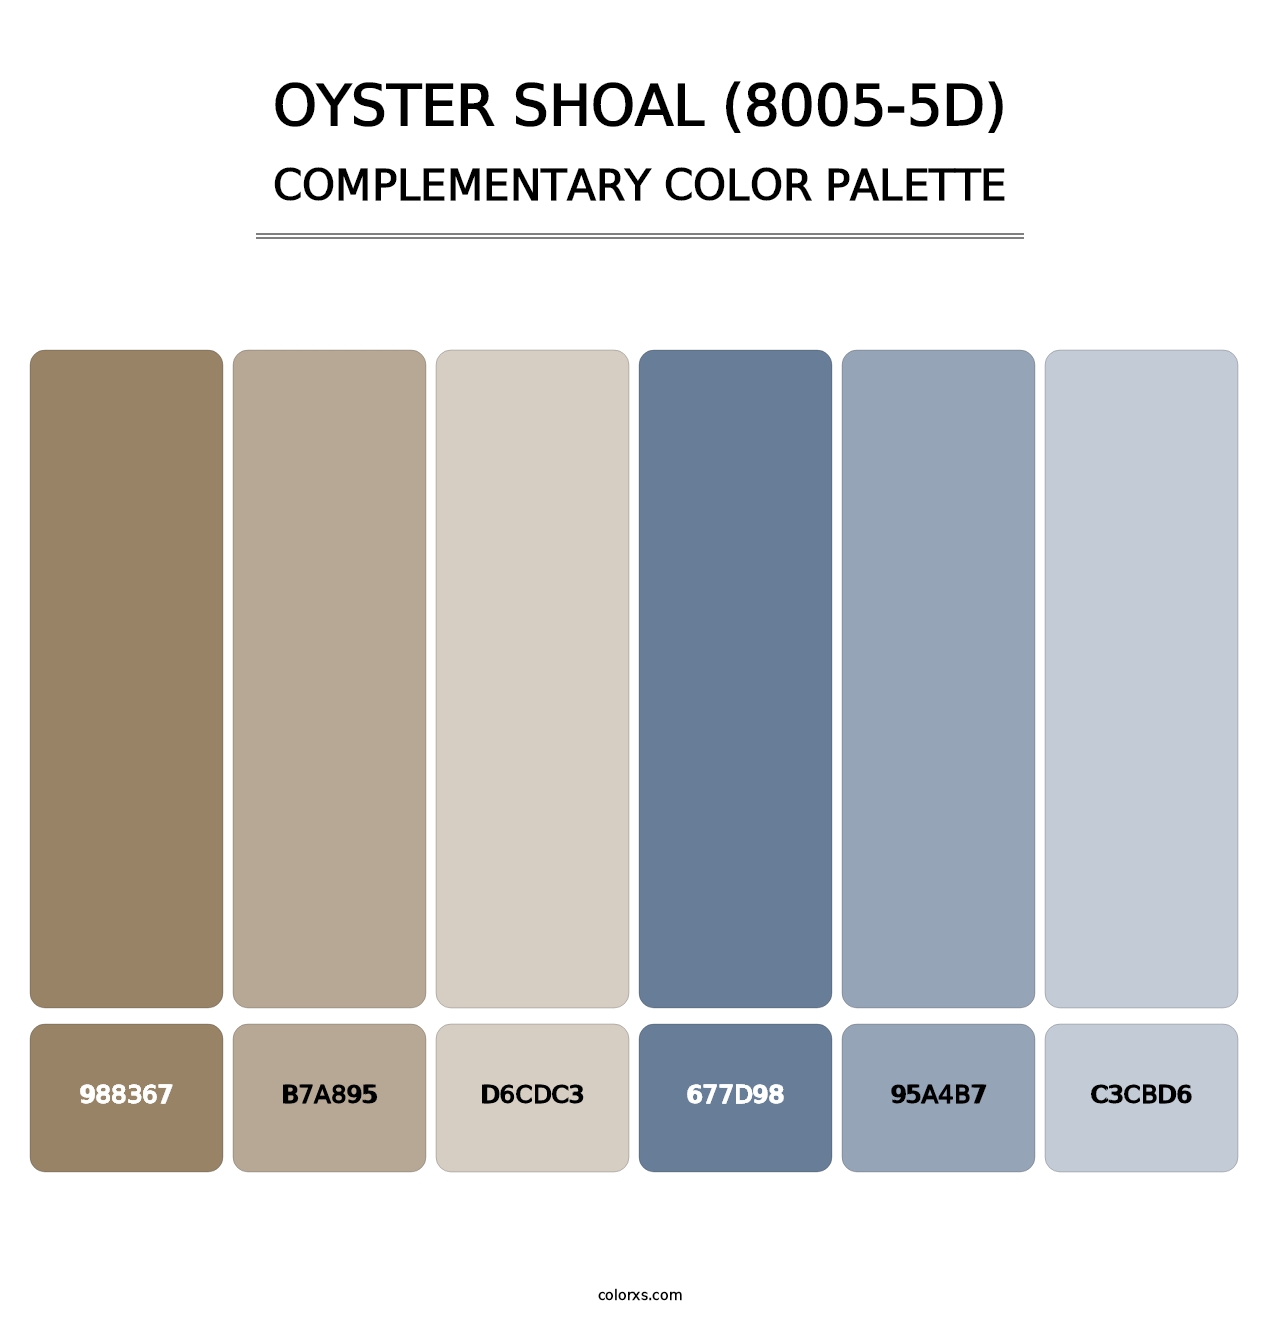 Oyster Shoal (8005-5D) - Complementary Color Palette